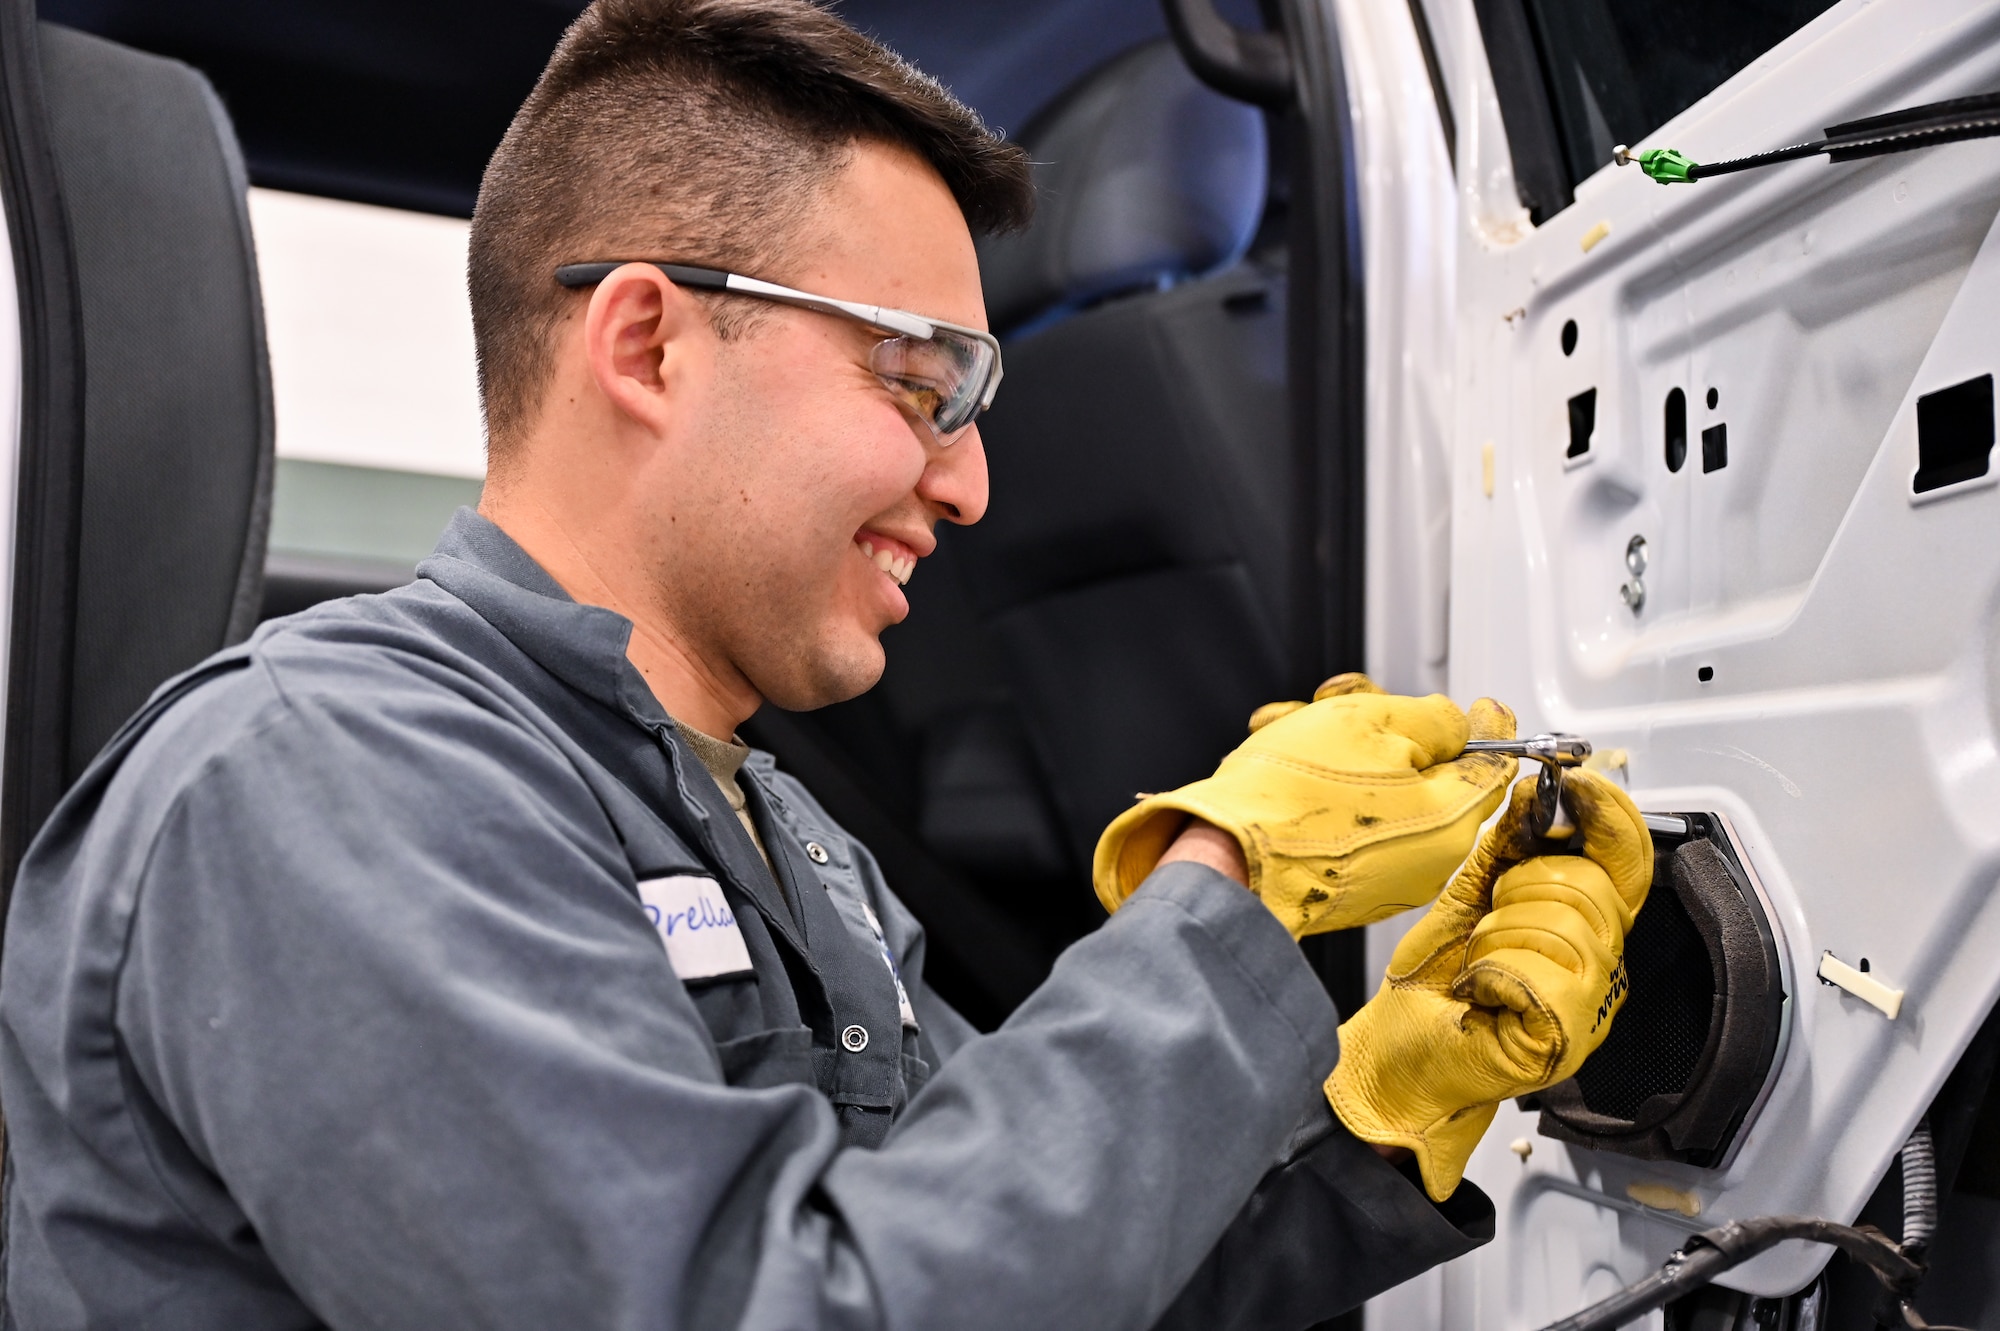 Airman 1st Class Marcos Orellana, 90th Logistics Readiness Squadron vehicle maintenance technician, removes a bolt from a Ford truck's rear passenger door to replace the door after it was damaged on F.E. Warren Air Force Base, Wyoming, Nov. 29, 2022. Orellana is assigned to the body shop to learn basic skills he can use on future deployments. With more than 40 years of experience, the 90 LRS Monster Garage or body shop team is repairing the 90th Missile Wing fleet while supporting the Air Force Global Strike priority of people by finding ways to train the next generation of Airmen and find innovative solutions. (U.S. Air Force photo by Joseph Coslett Jr.)